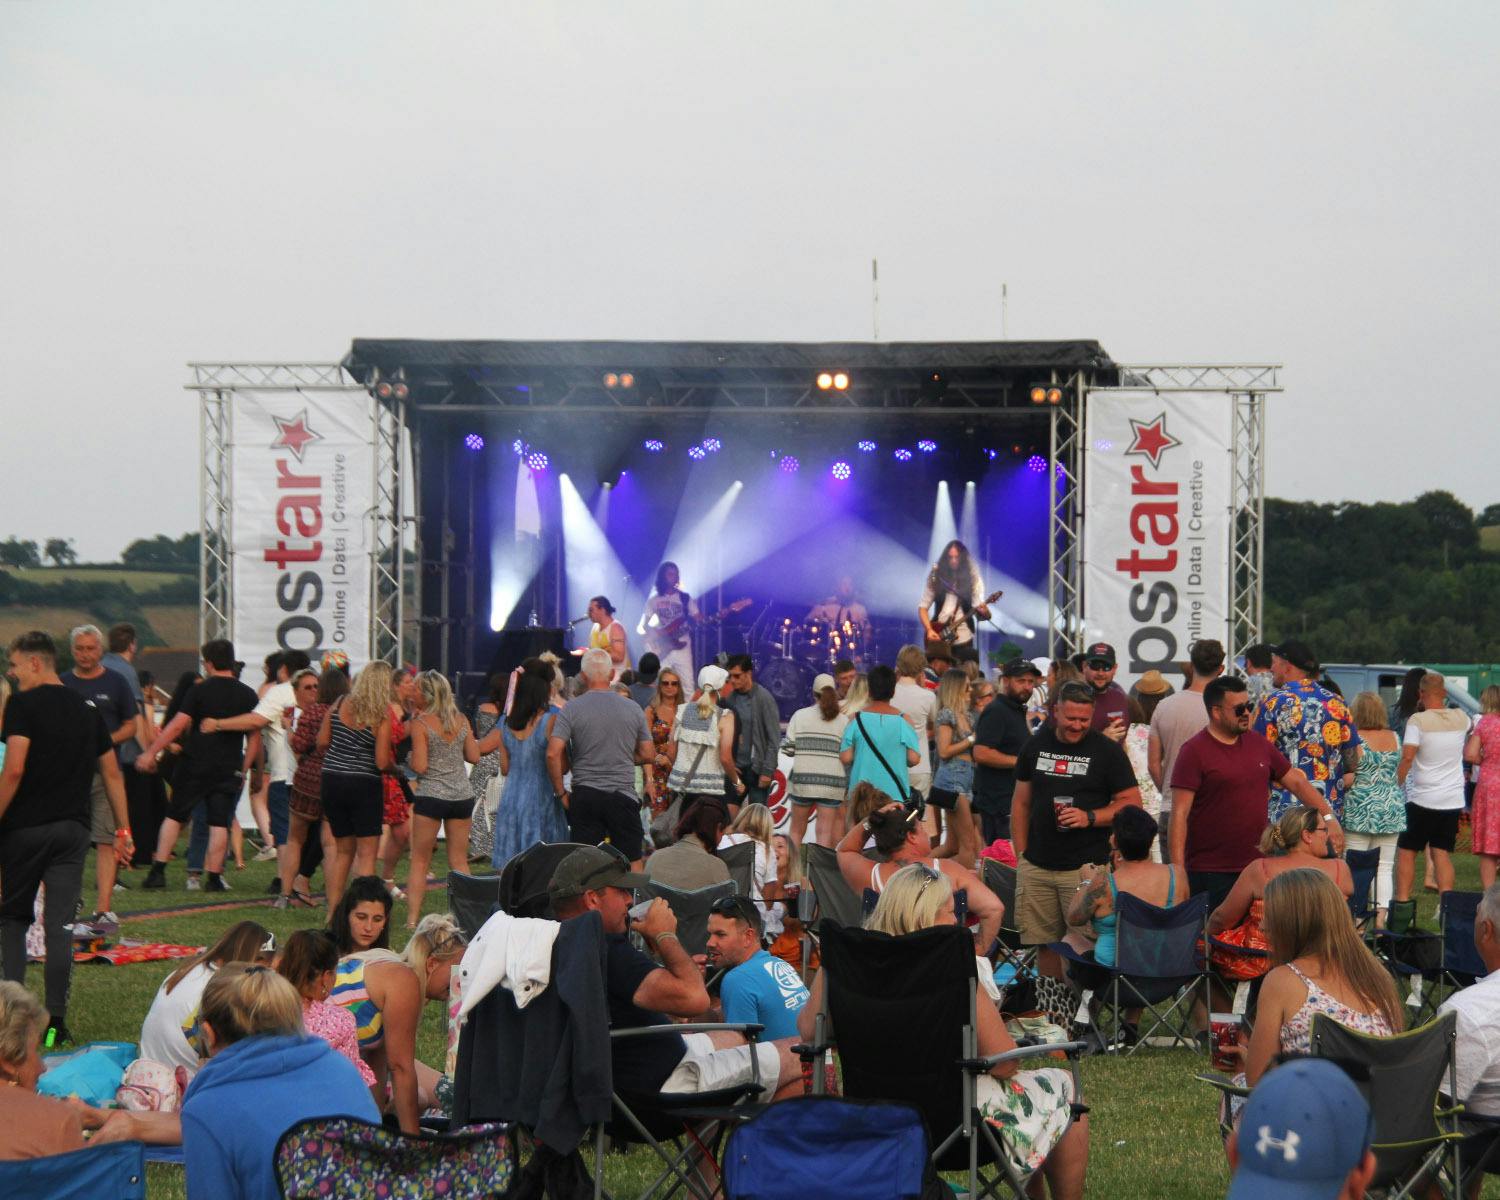 a stage at razzfest with an artist performing and a crowd watching